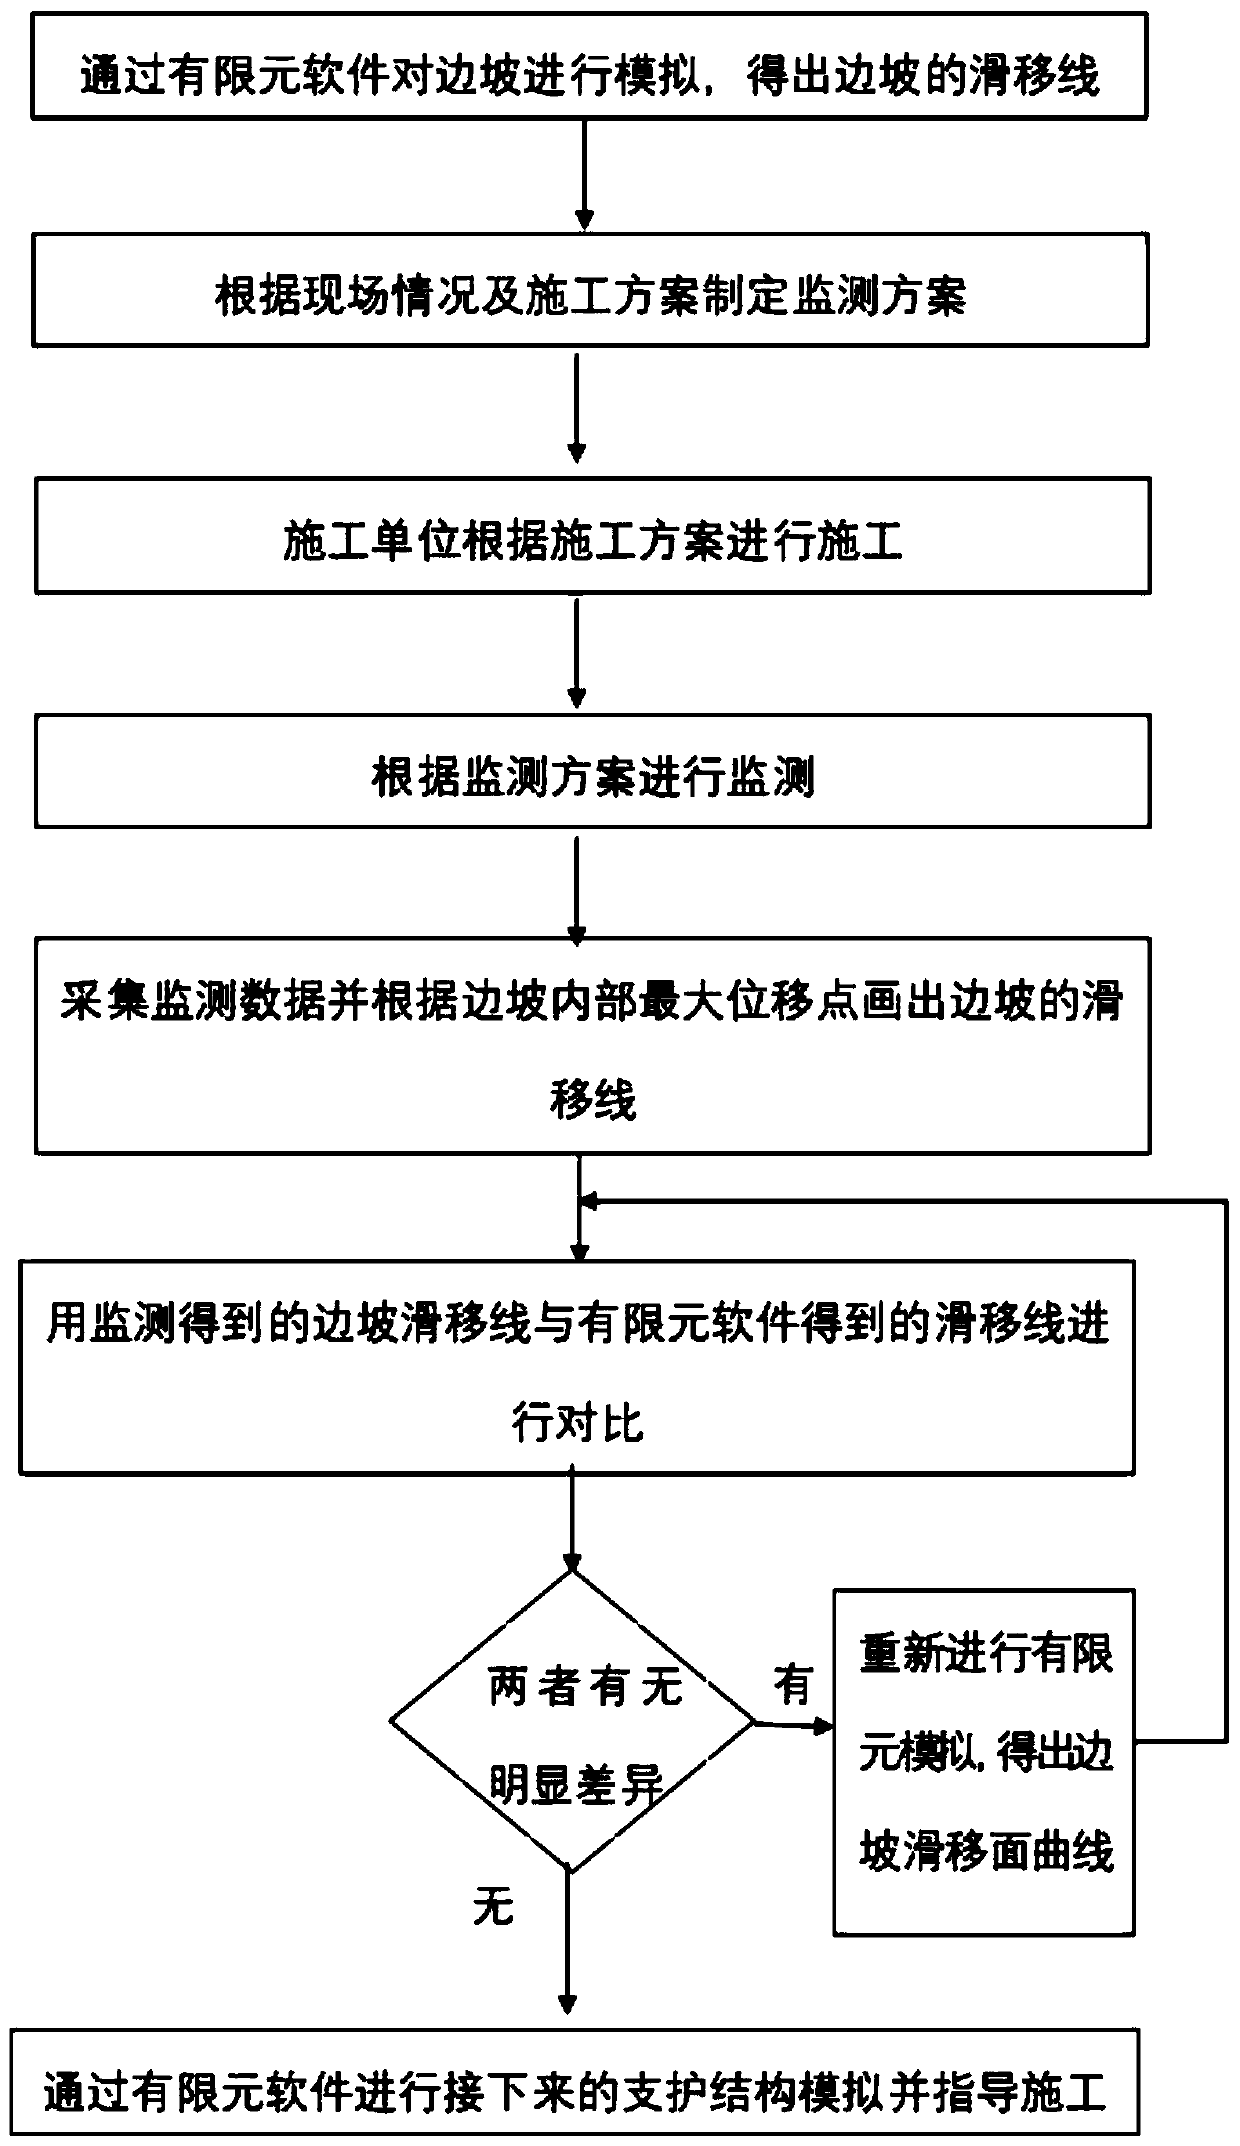 Monitoring and verification system and method for overall failure mode of soil and rock double-element side slope